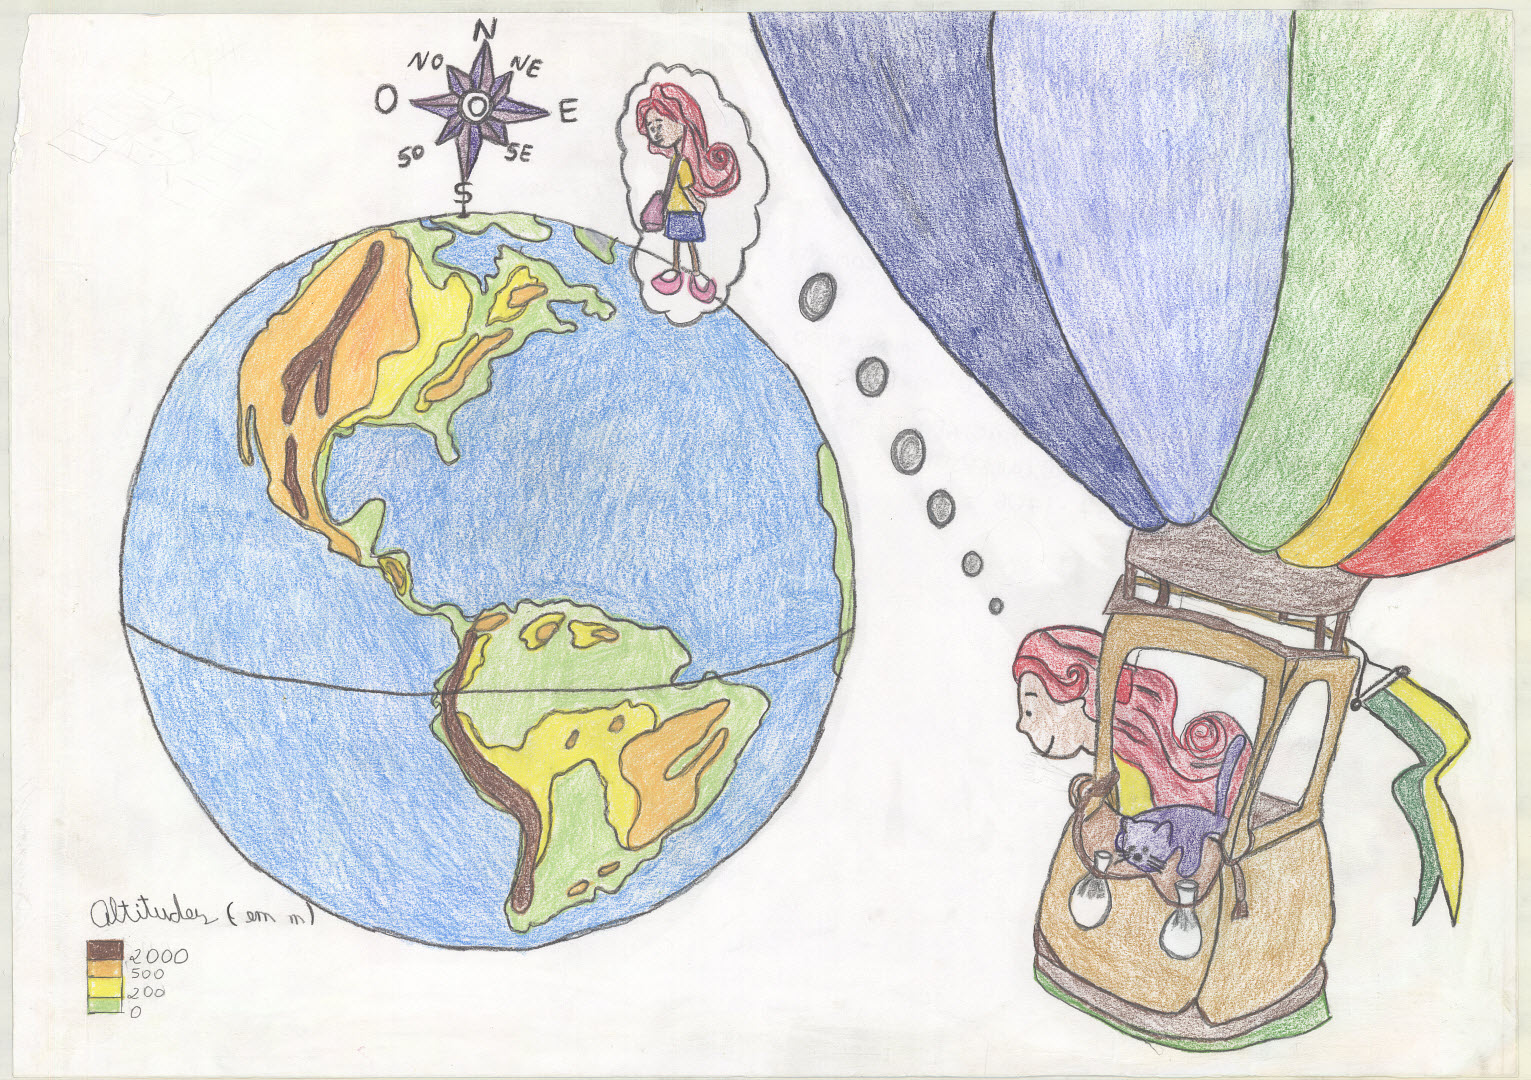 A child in a hot air balloon looking at the planet, heights mapped